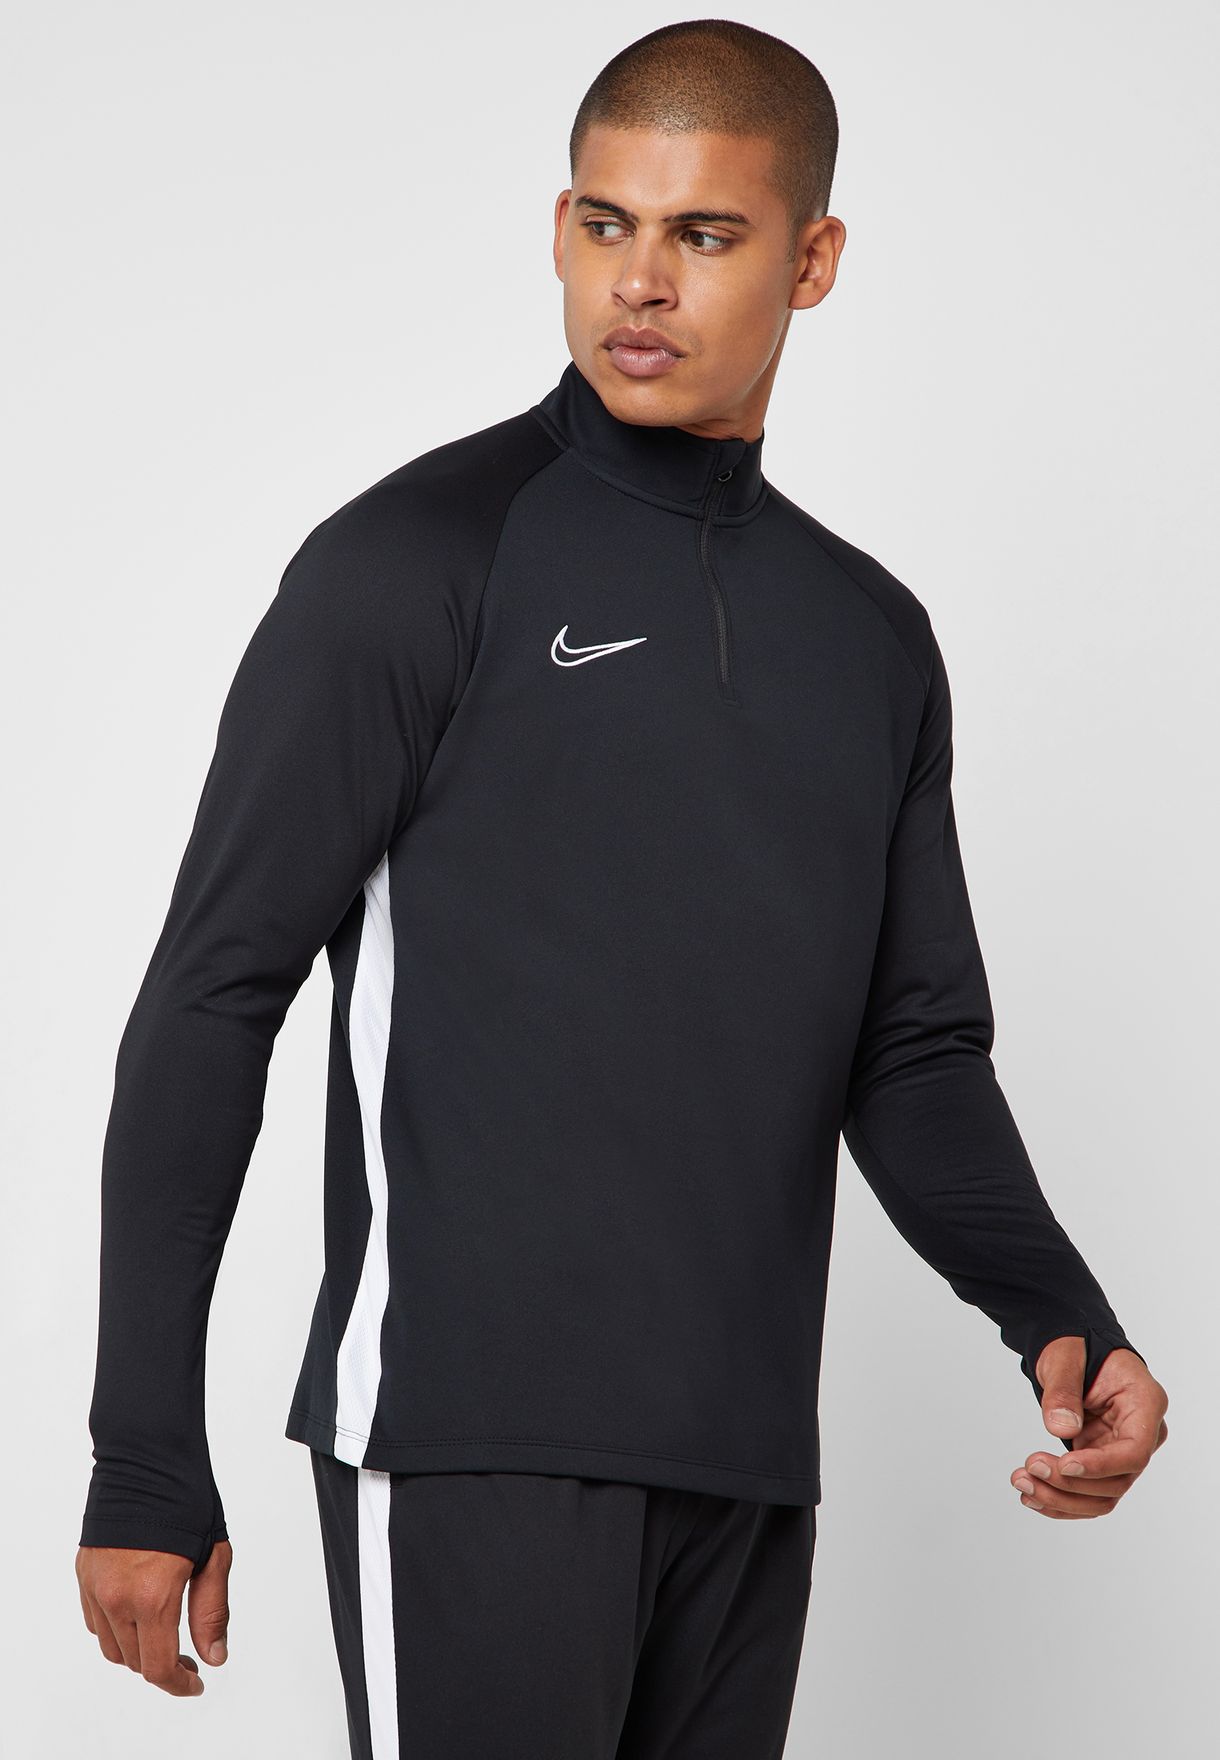 Buy > nike dri fit academy drill > in stock